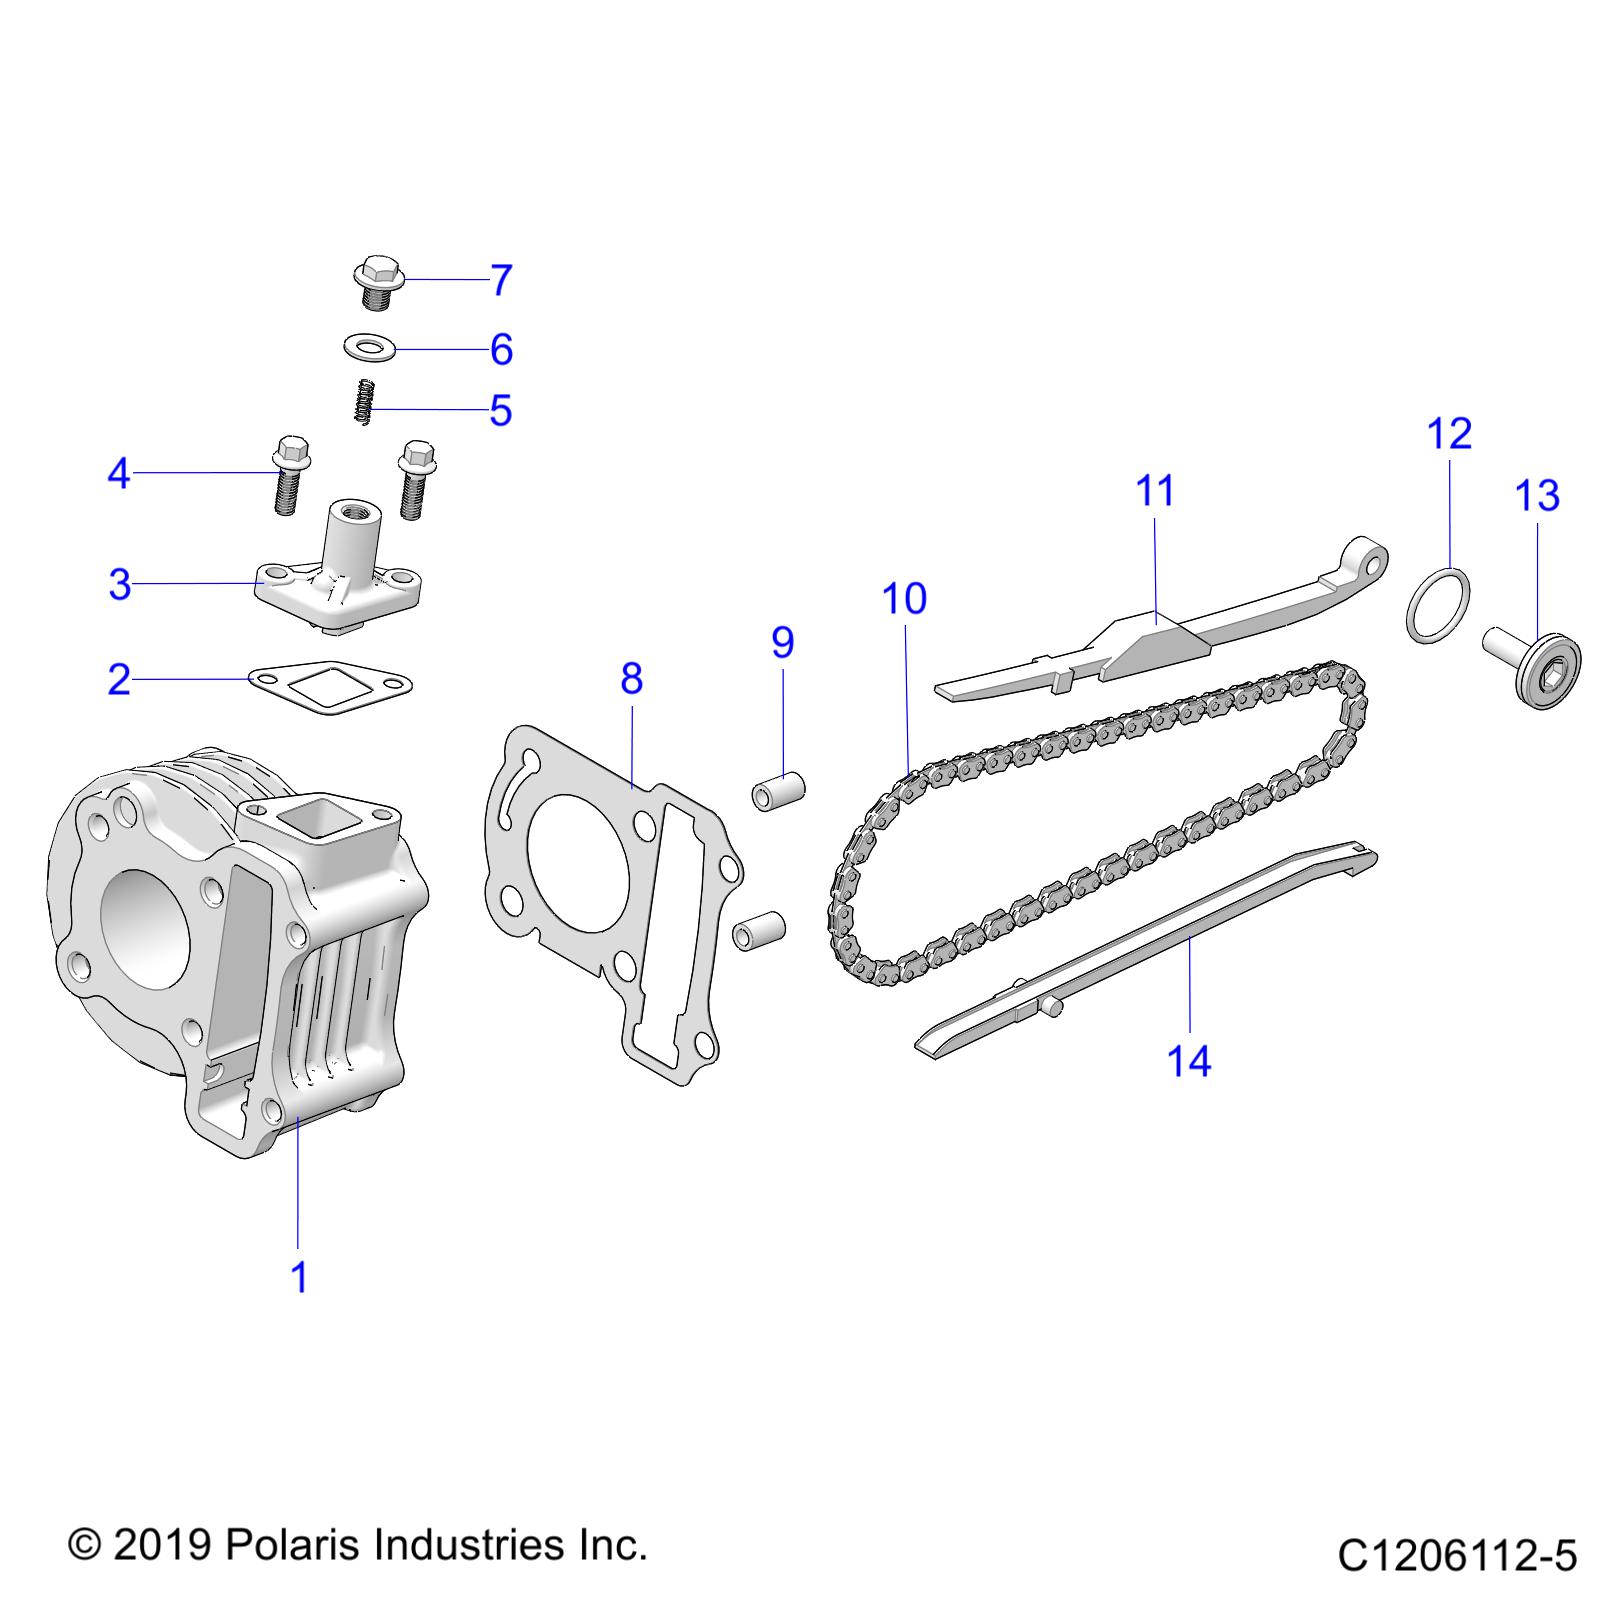 Part Number : 3023853 CAMCHAIN TENSIONER